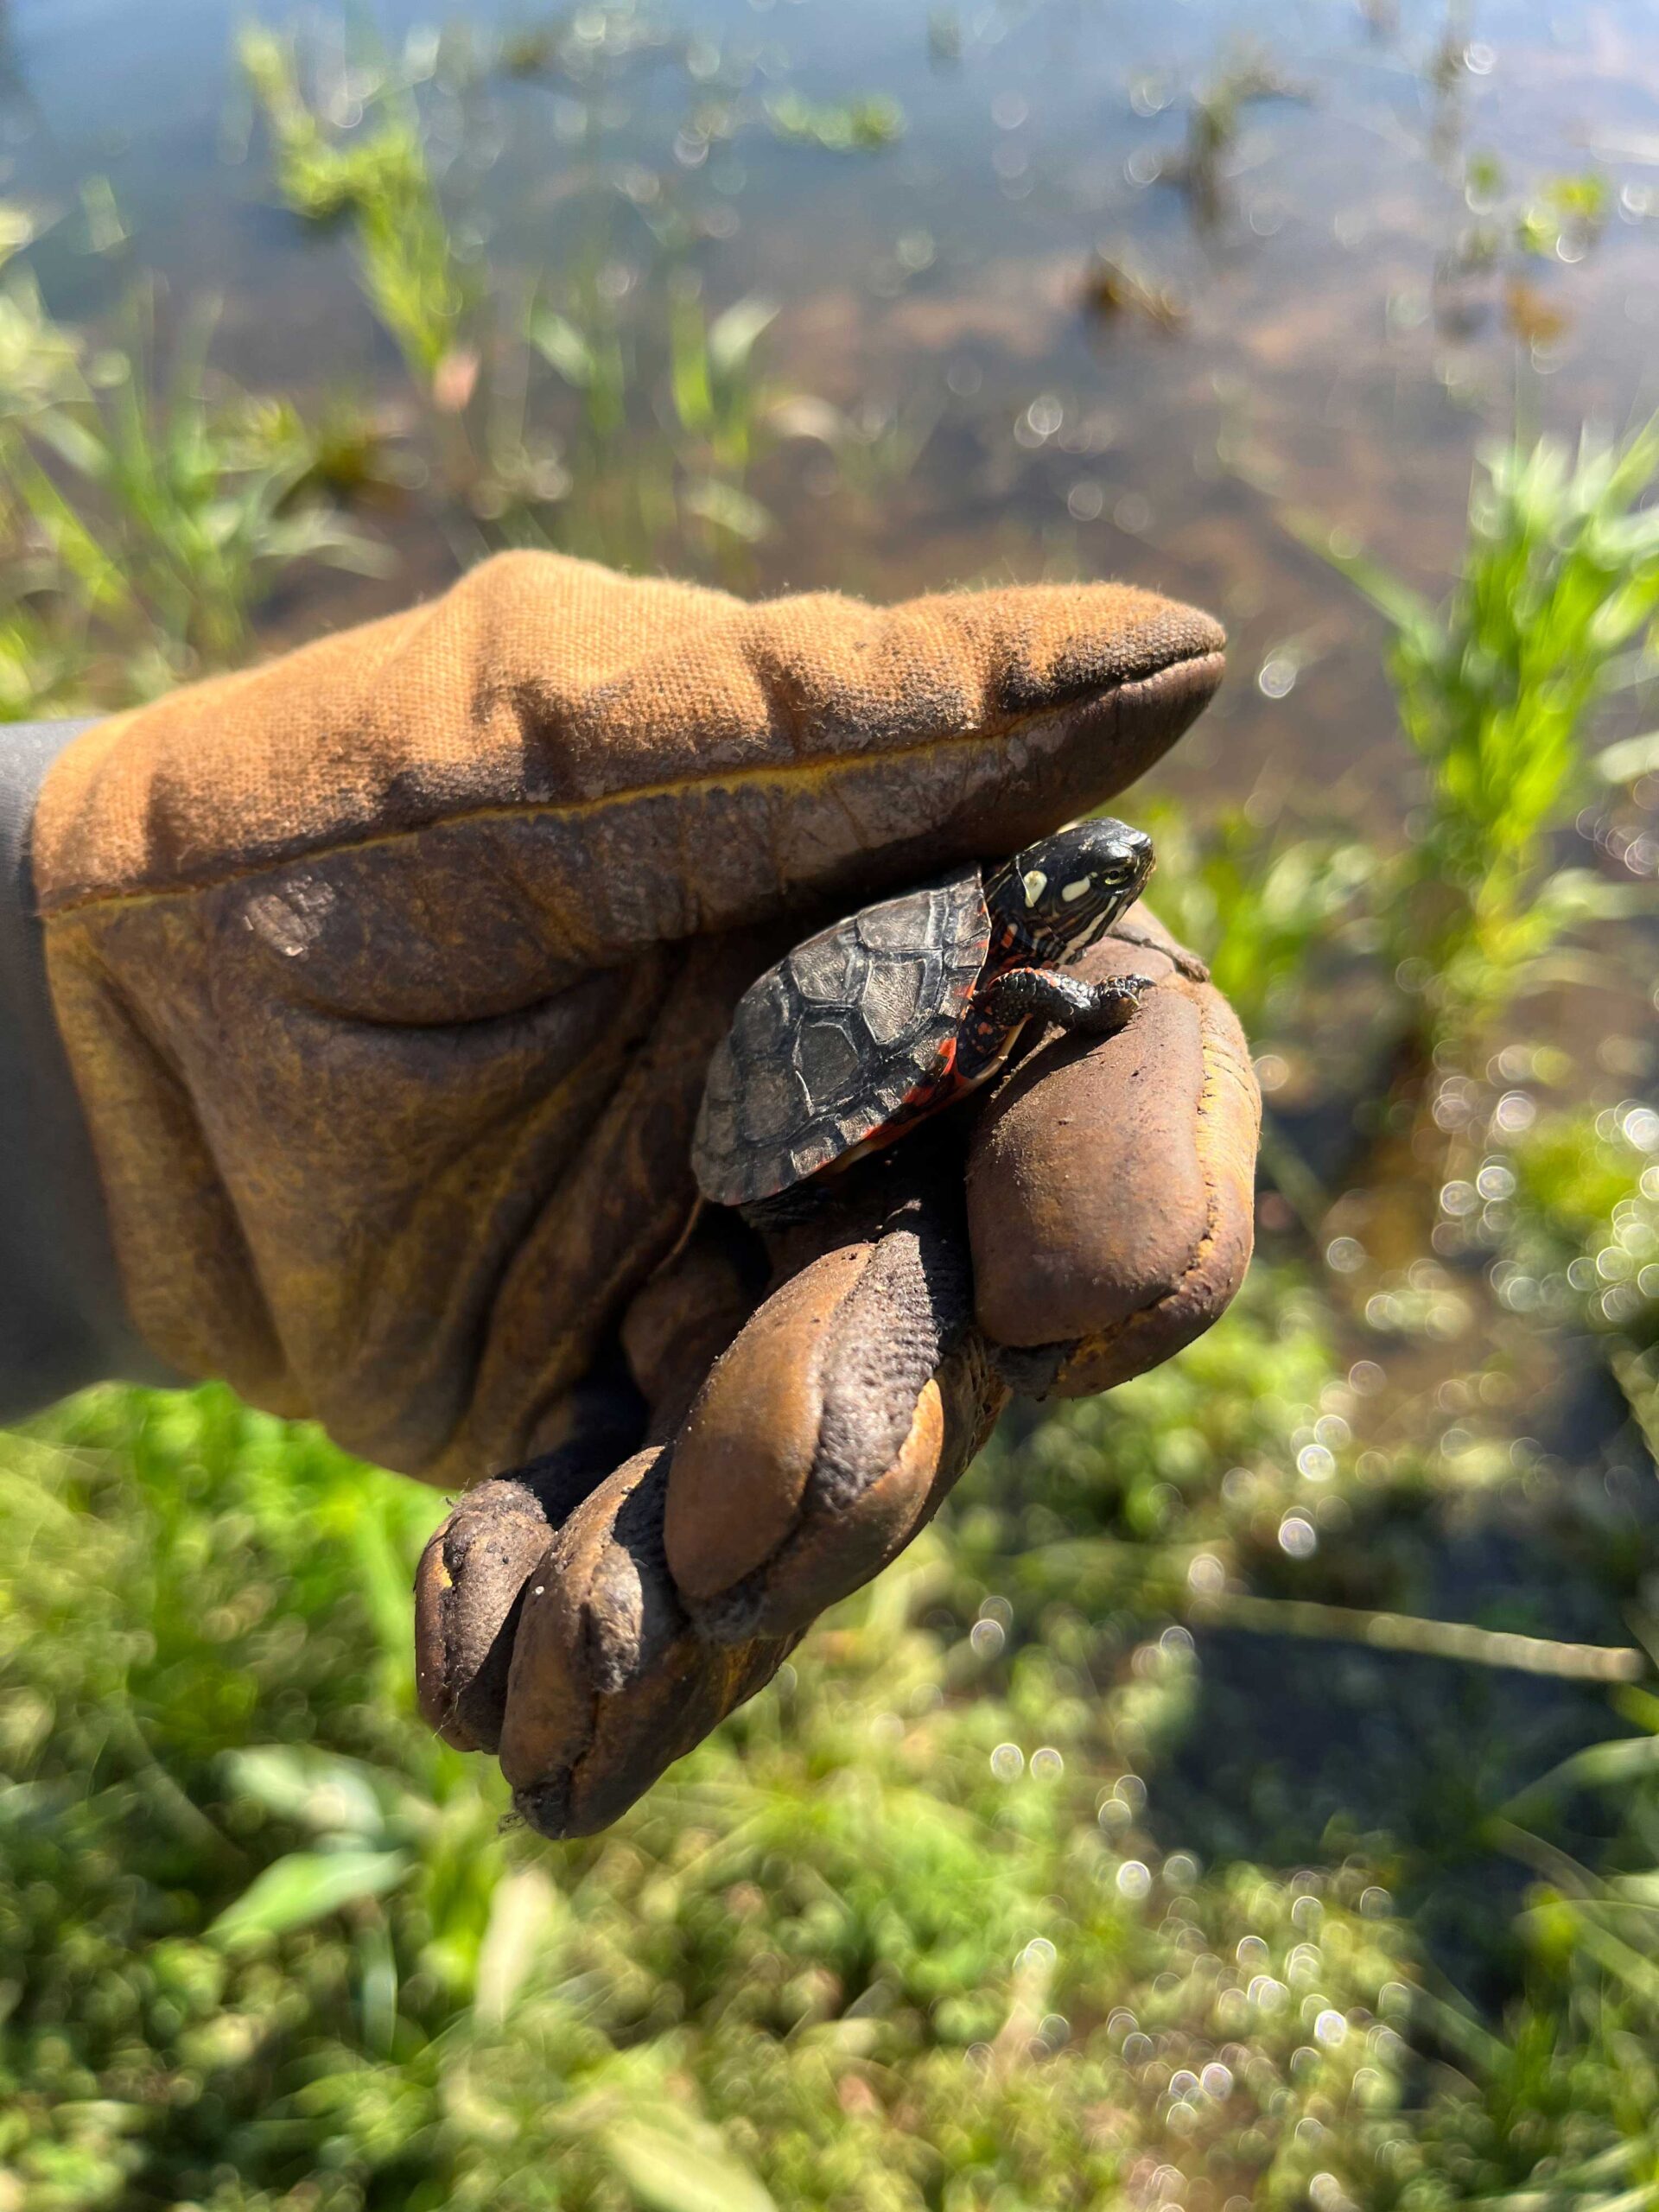 Painted Turtle in glove